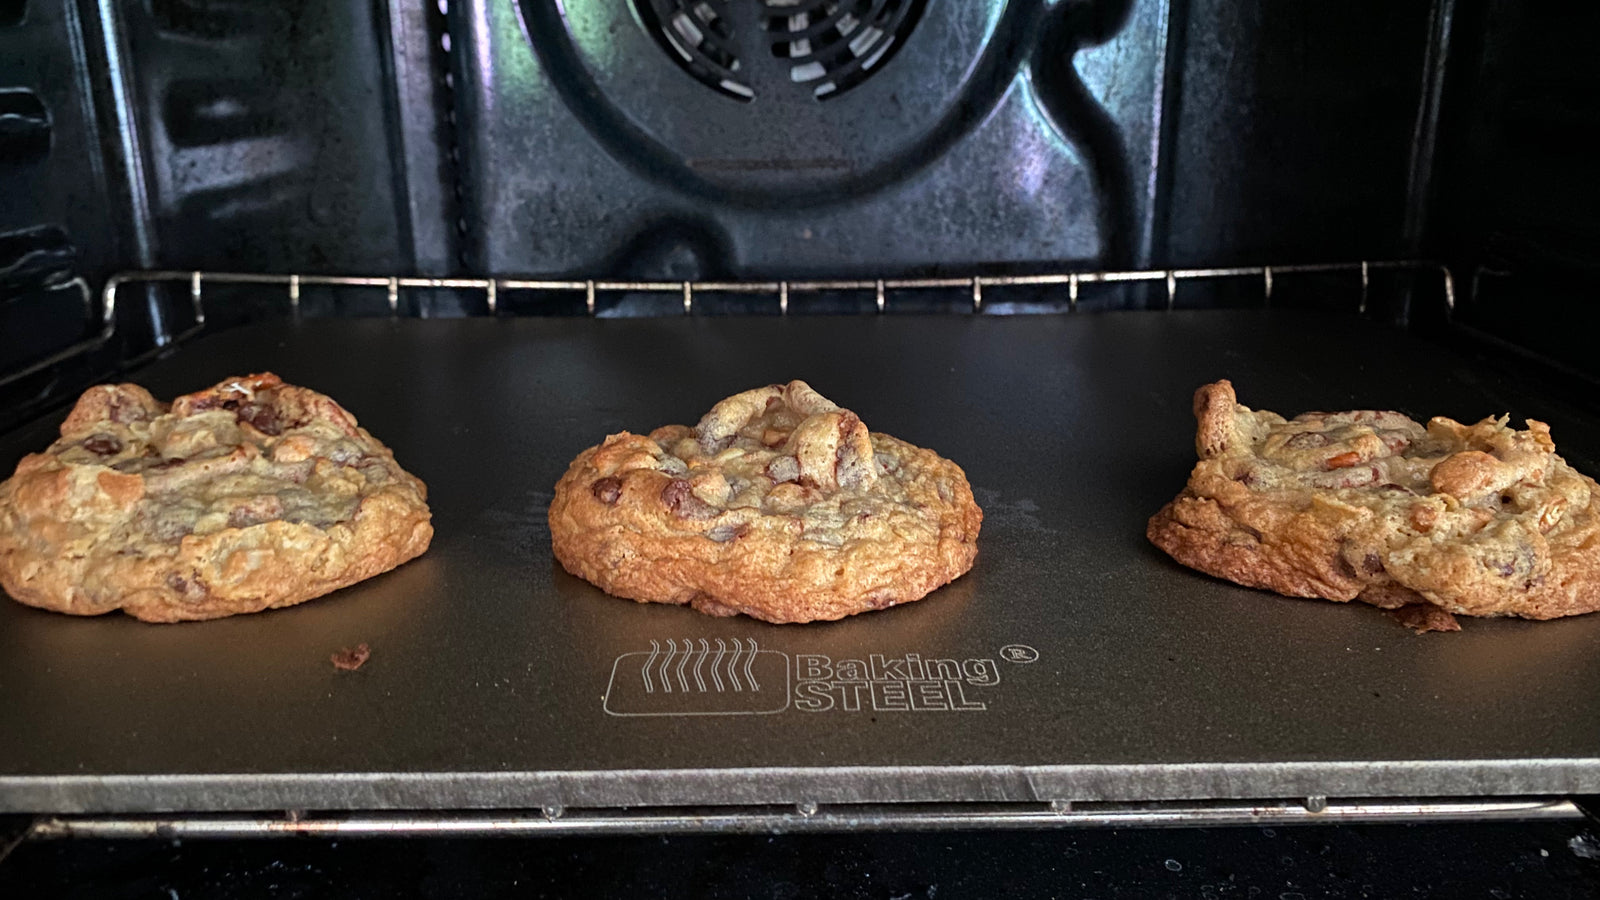 Delicious kitchen sink cookies right out of the oven